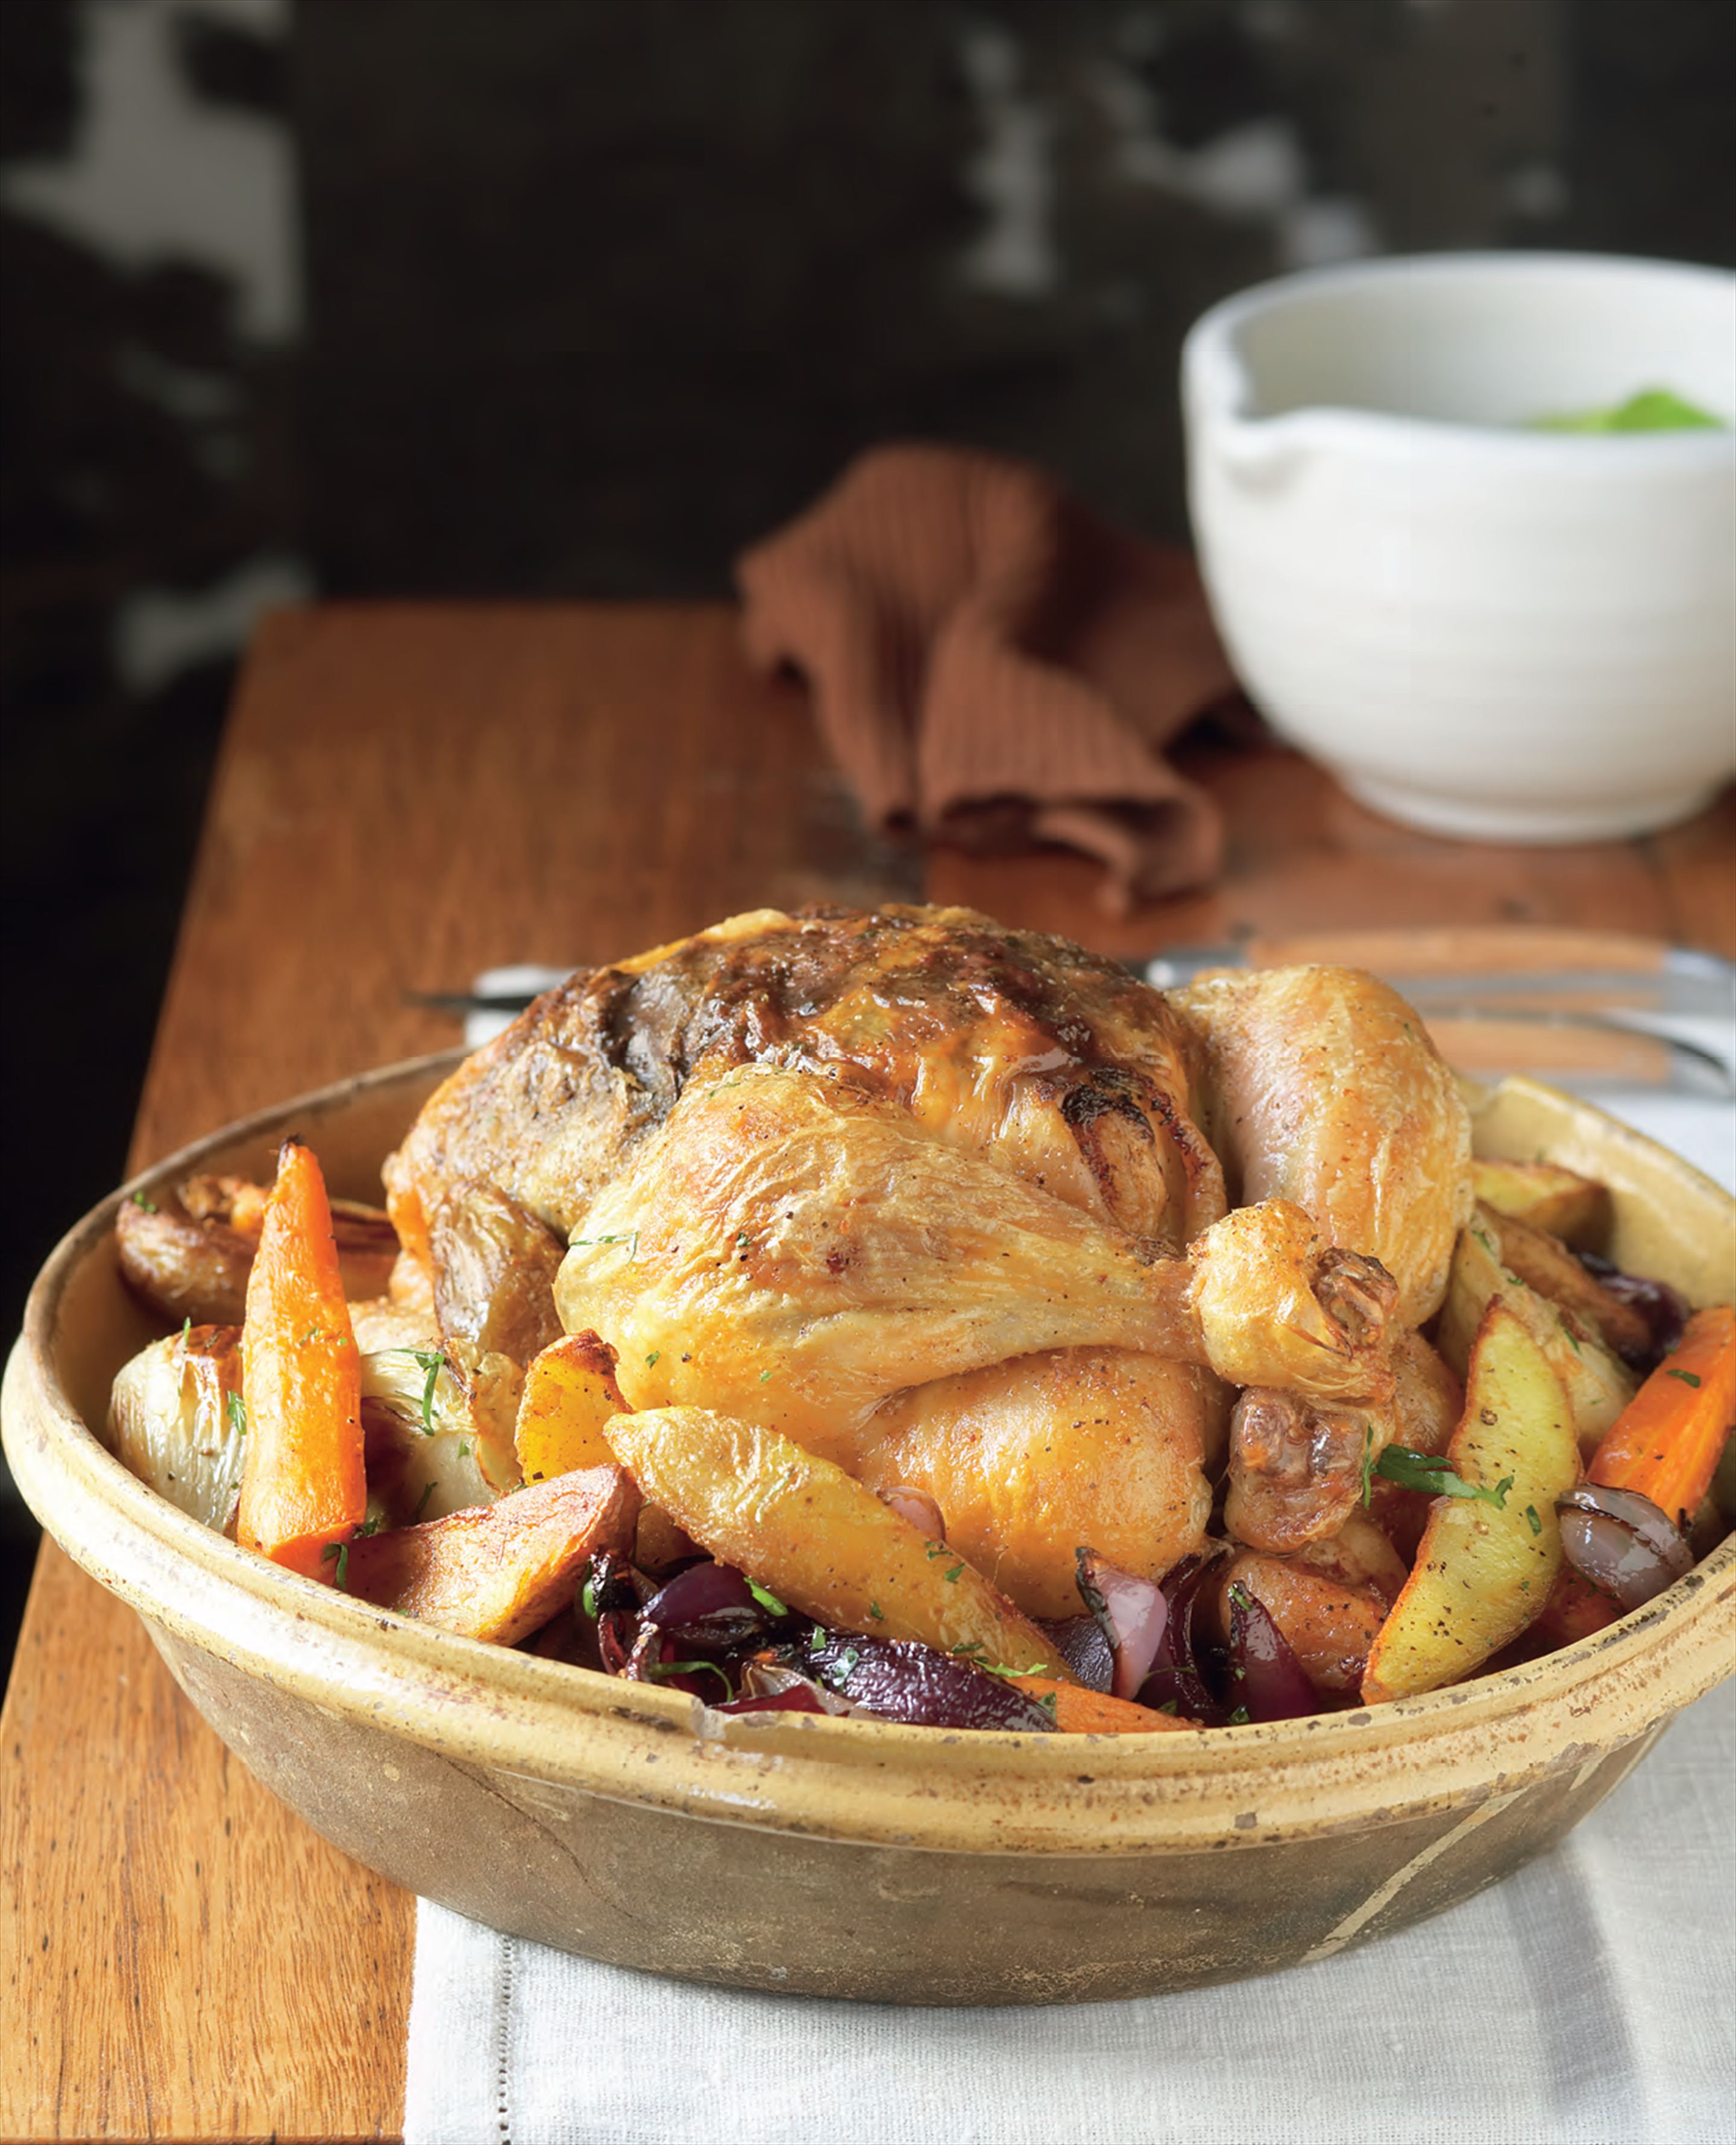 The perfect roast chicken